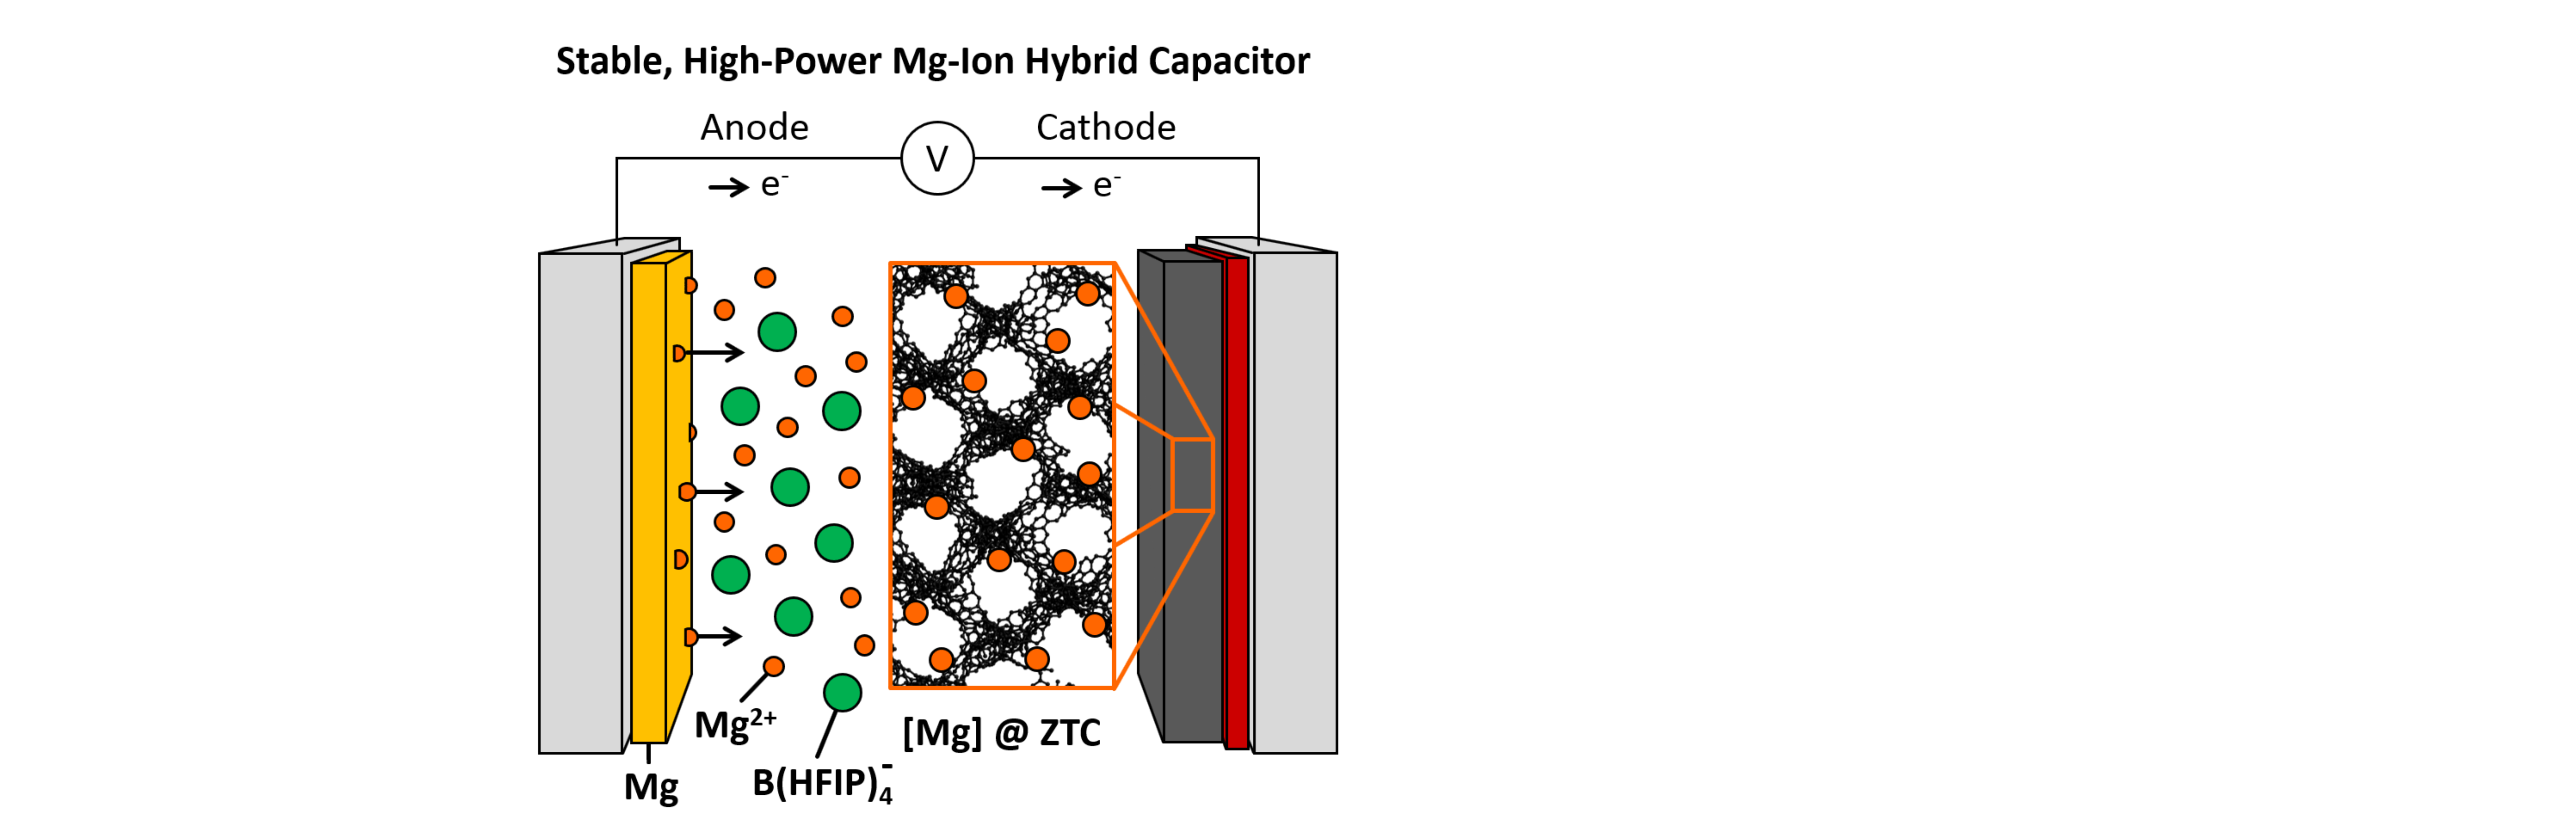 Zeolite-Templated Carbon as a Stable, High Power Magnesium-Ion Cathode Material